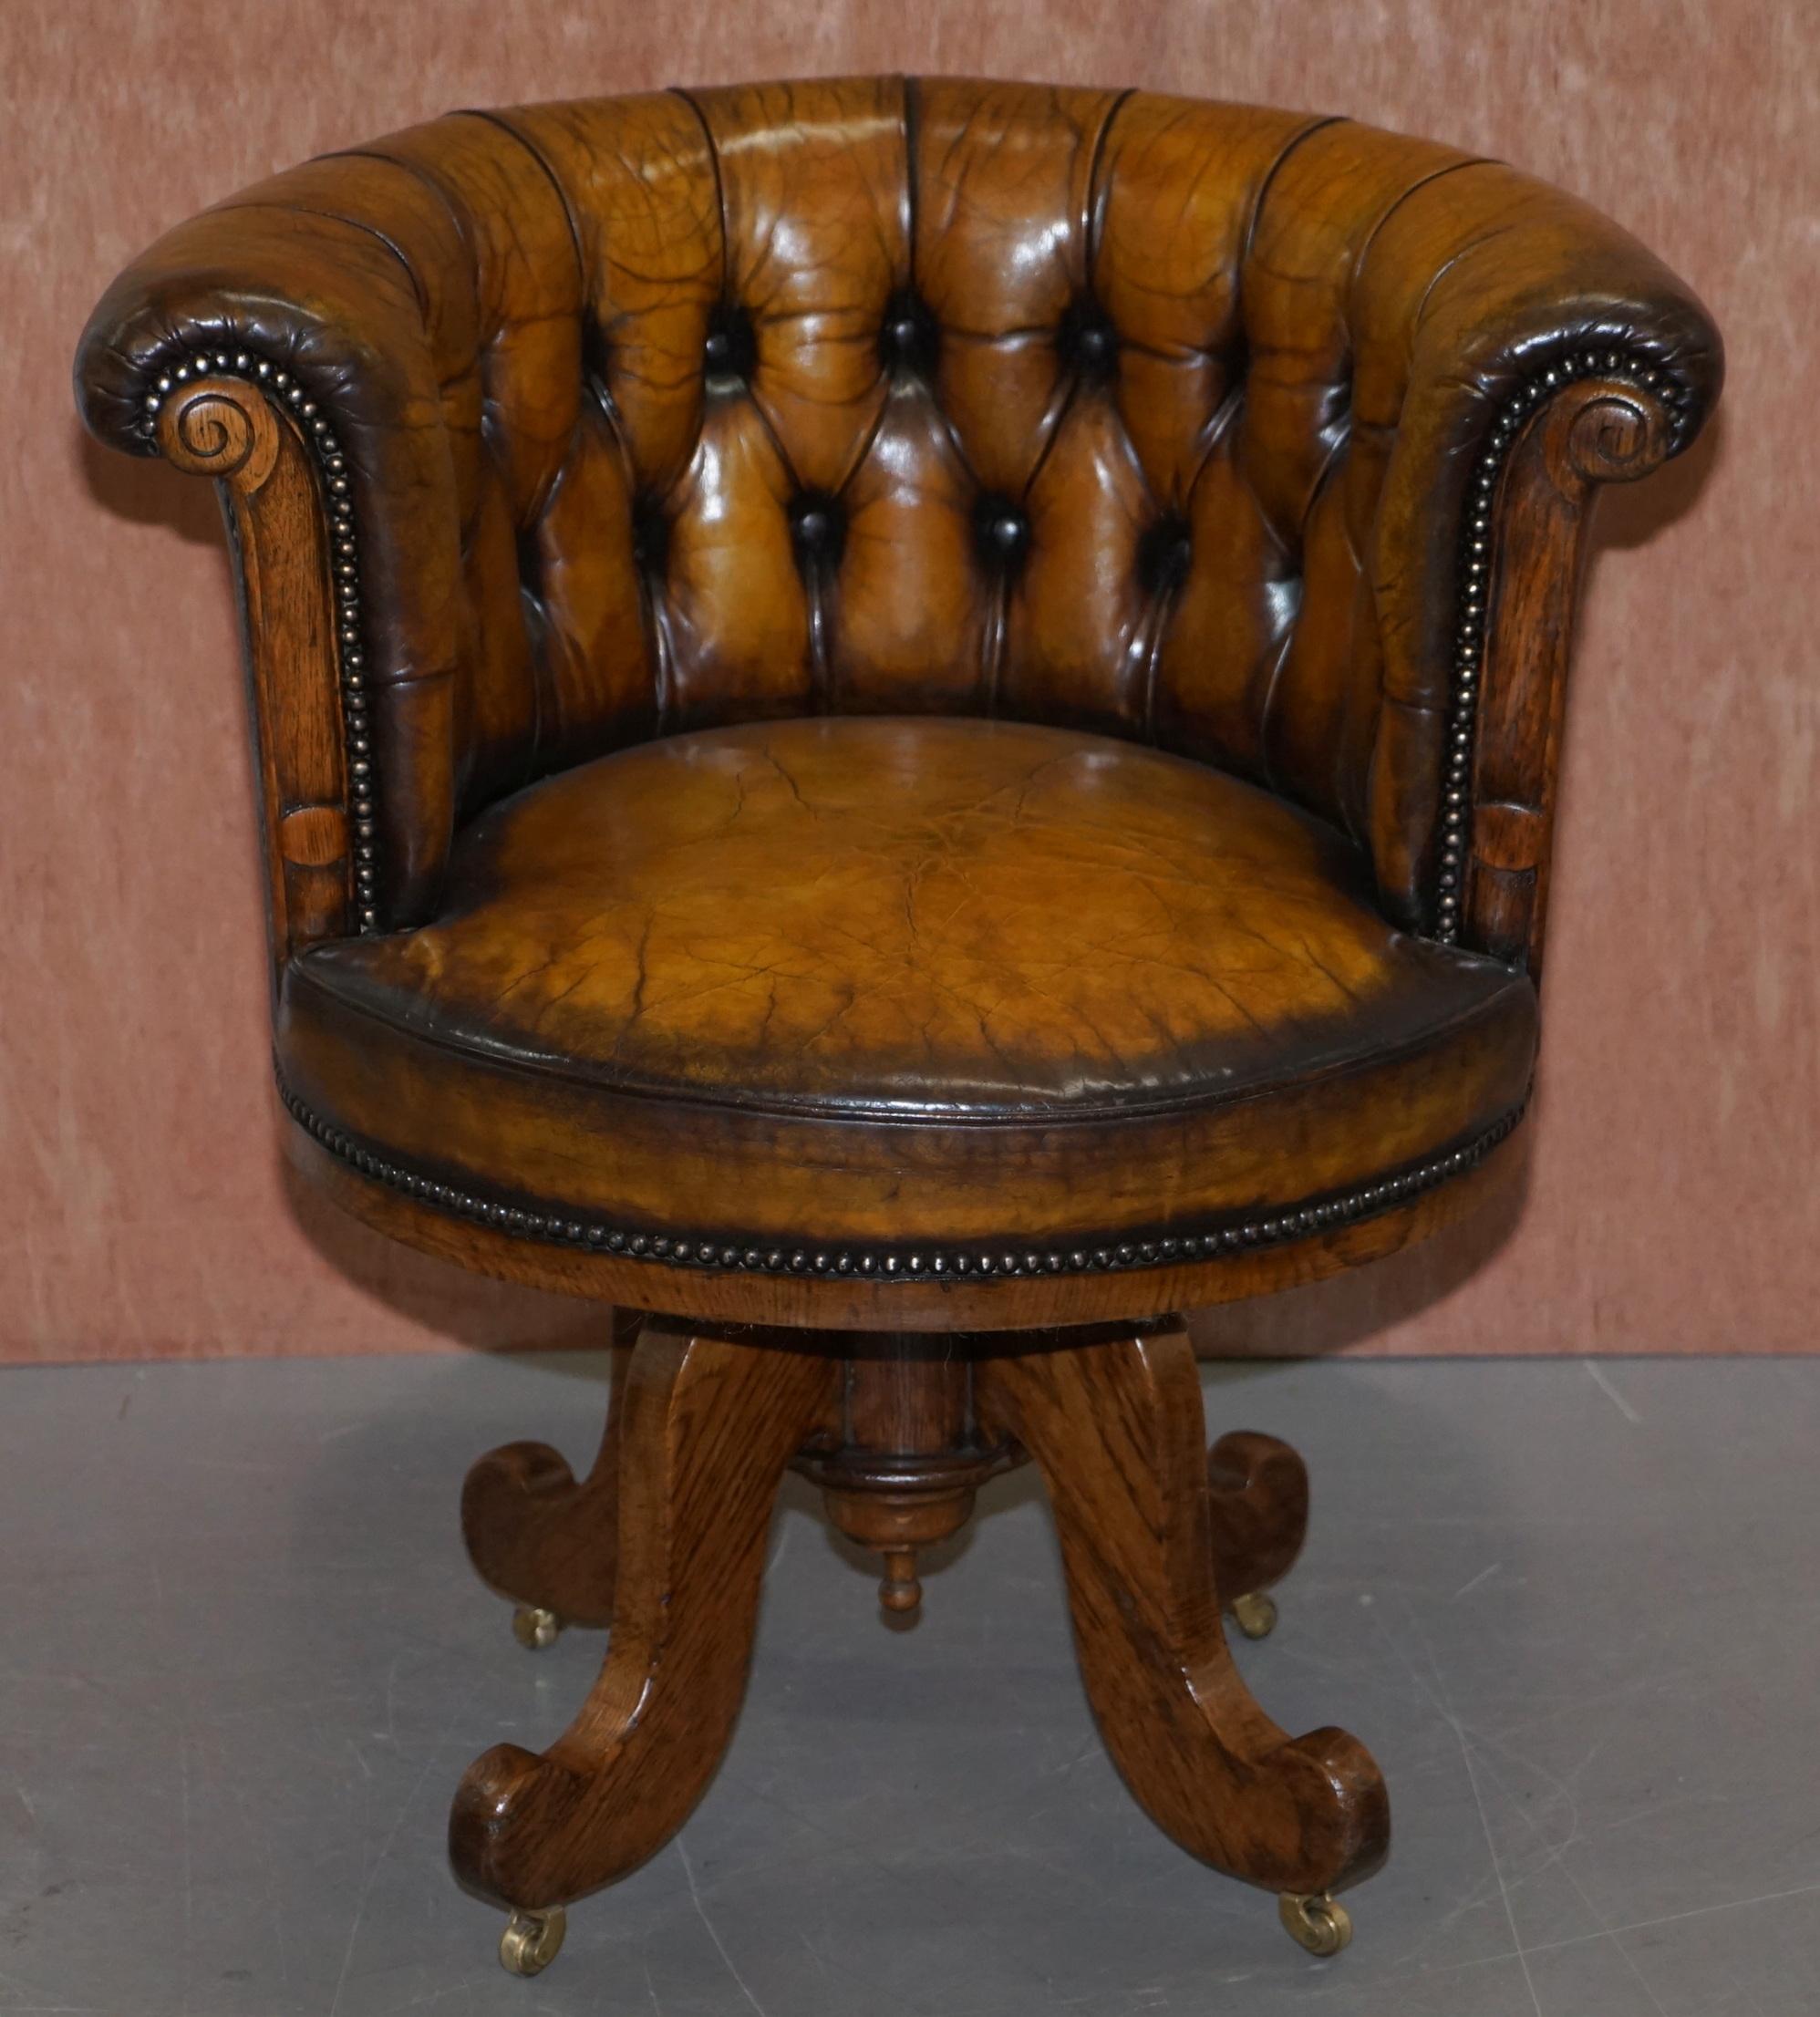 We are delighted to offer for sale this very rare and important fully restored circa 1860 barrel back Chesterfield hand dyed brown leather office chair

This chair is really quite exquisite, its one of the earliest types of swivel chairs I have